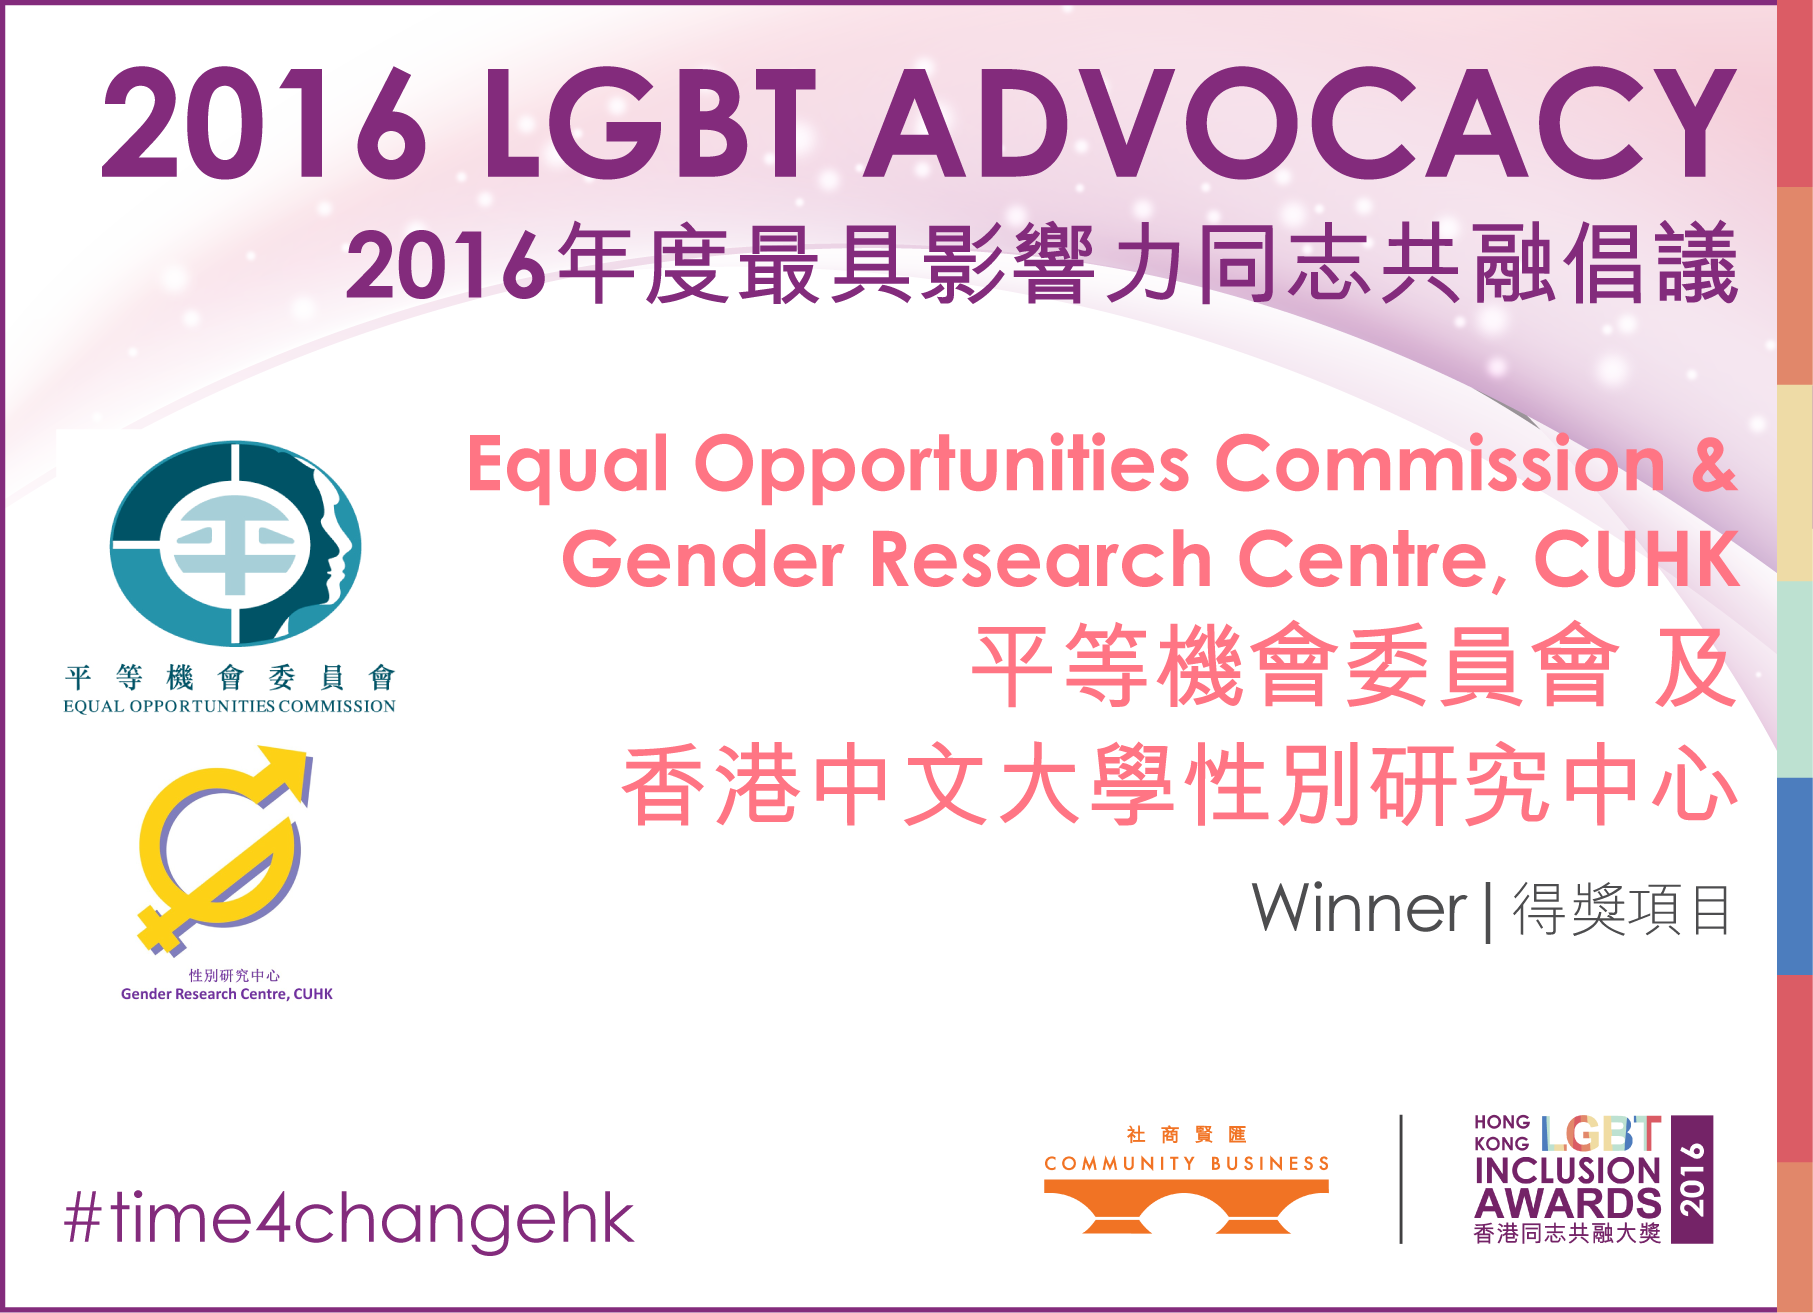 LGBT Advocacy Award organised by Community Business